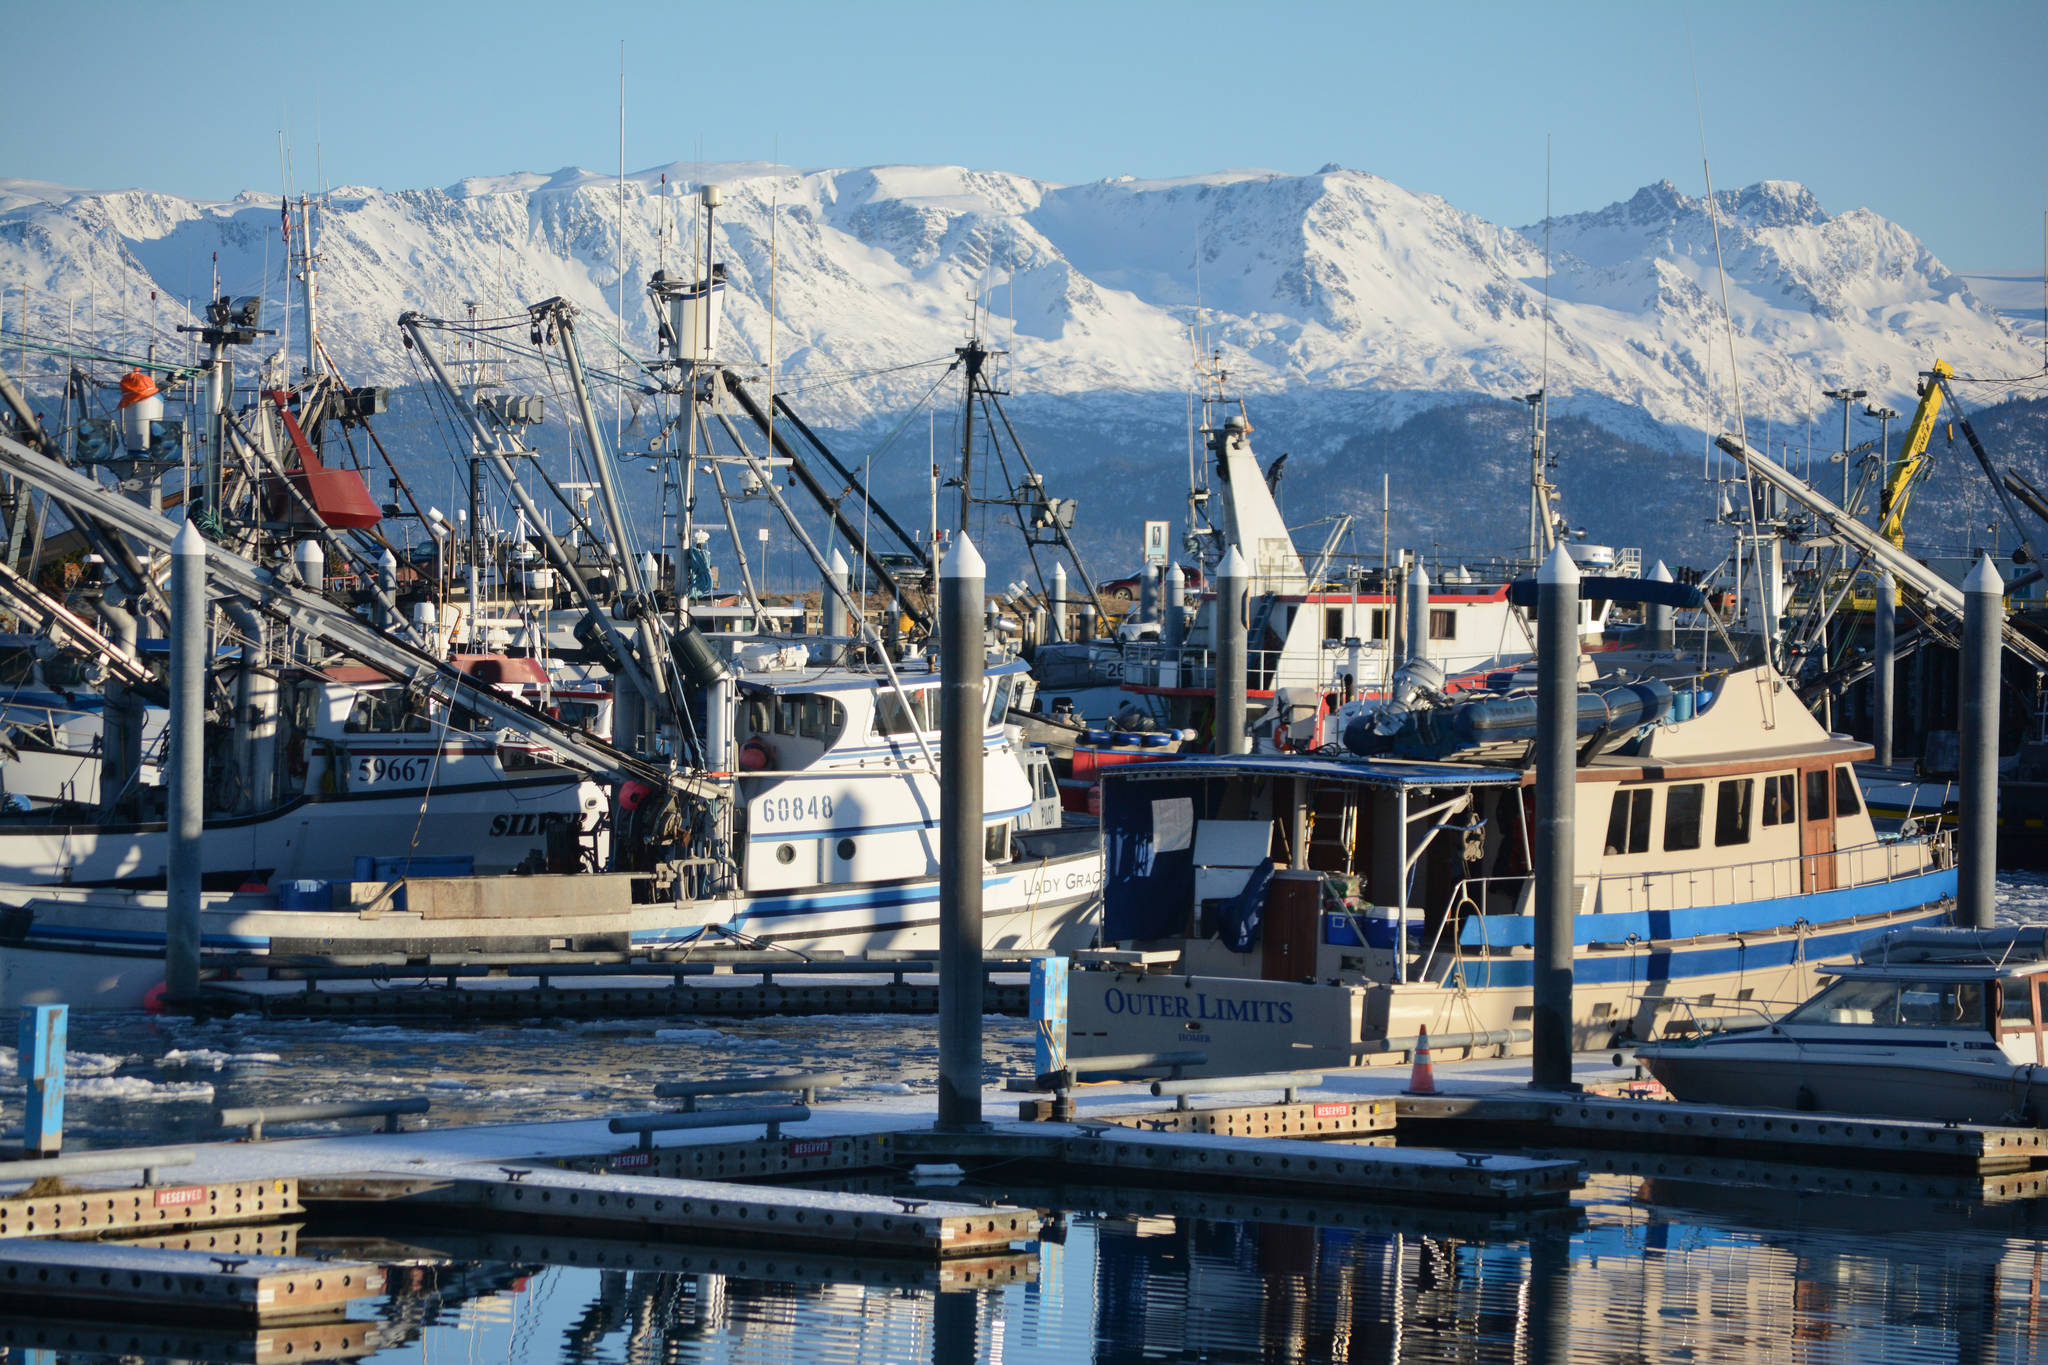 Commercial fishing and other boats are moored in the Homer Harbor in this file photo taken in January 2017 in Homer, Alaska. (Photo by Michael Armstrong/Homer News)